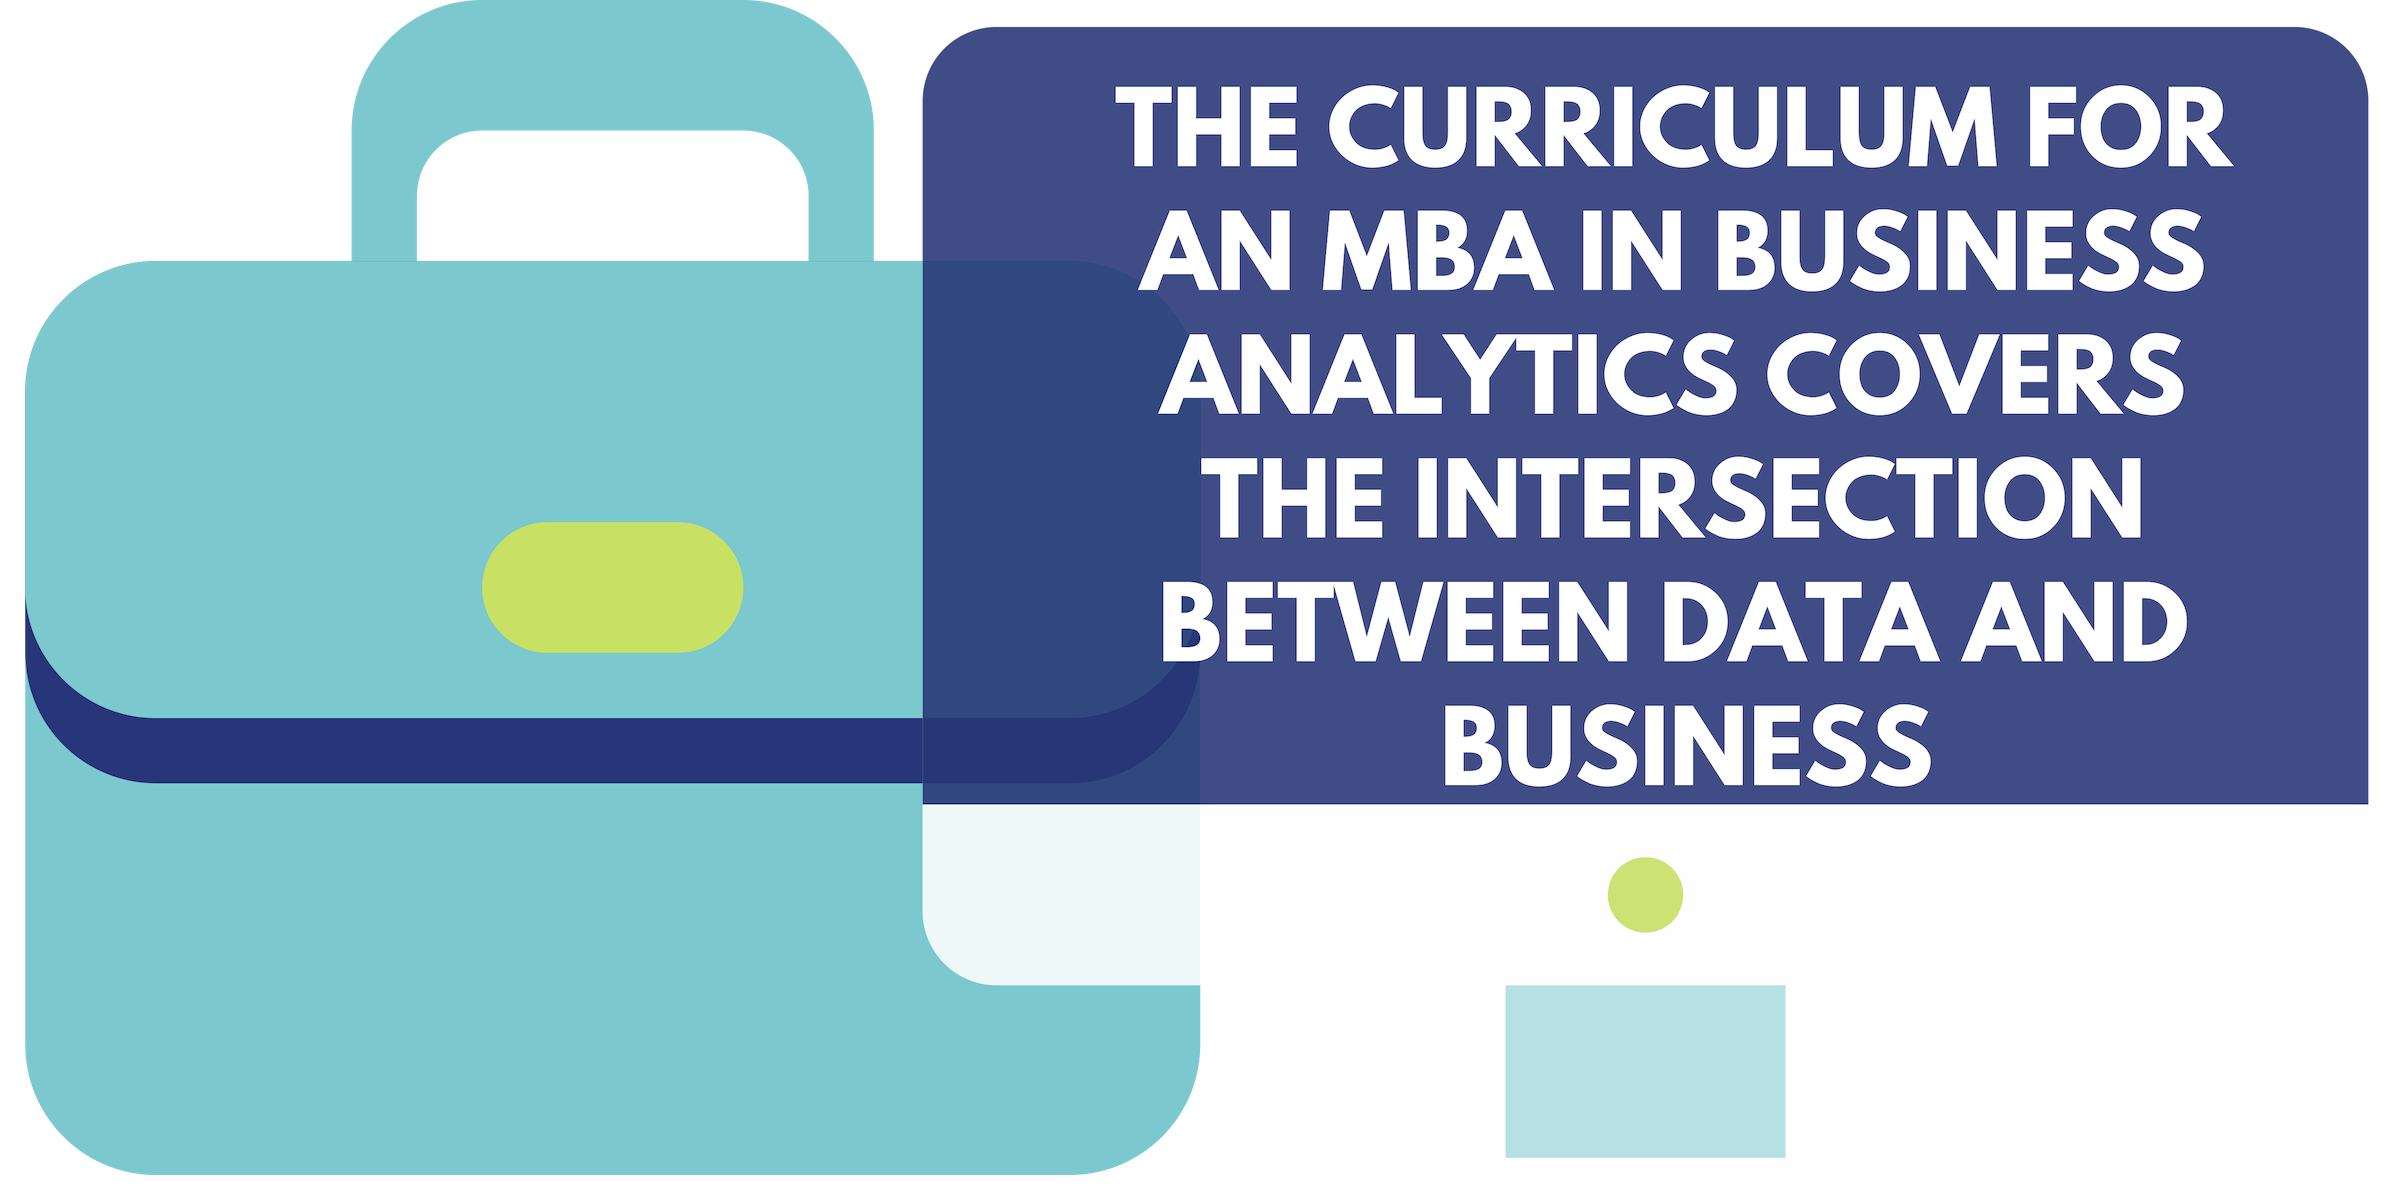 The curriculum for an MBA in Business Analytics covers the intersection between data and business